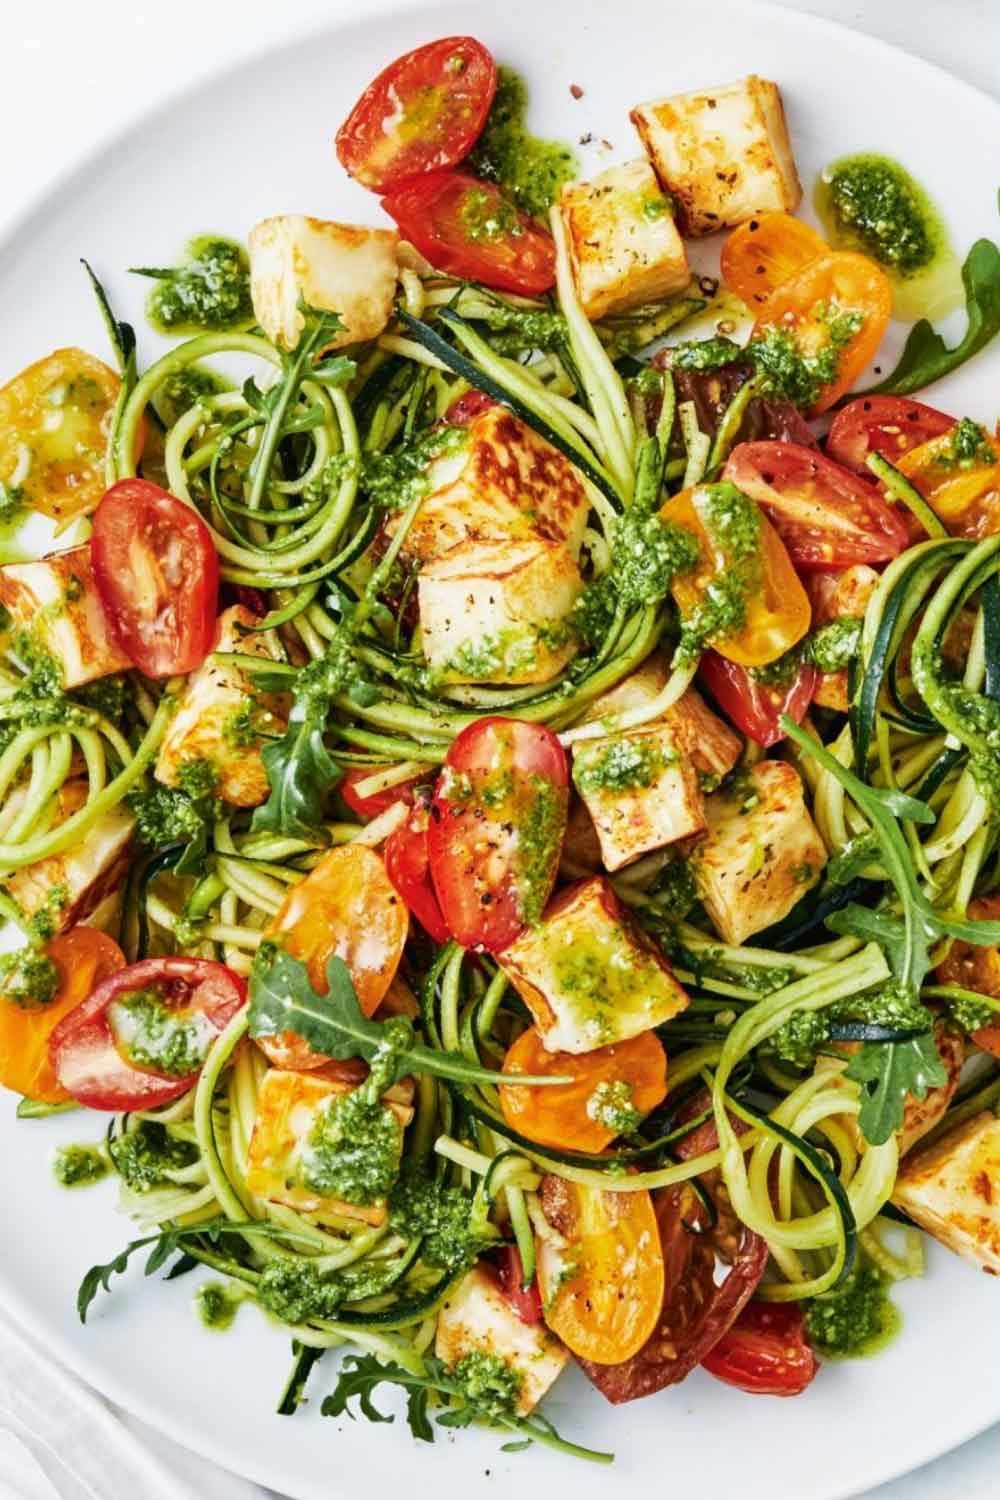 Haloumi 'bacon' and Broccolini With Sweet Potato Noodles